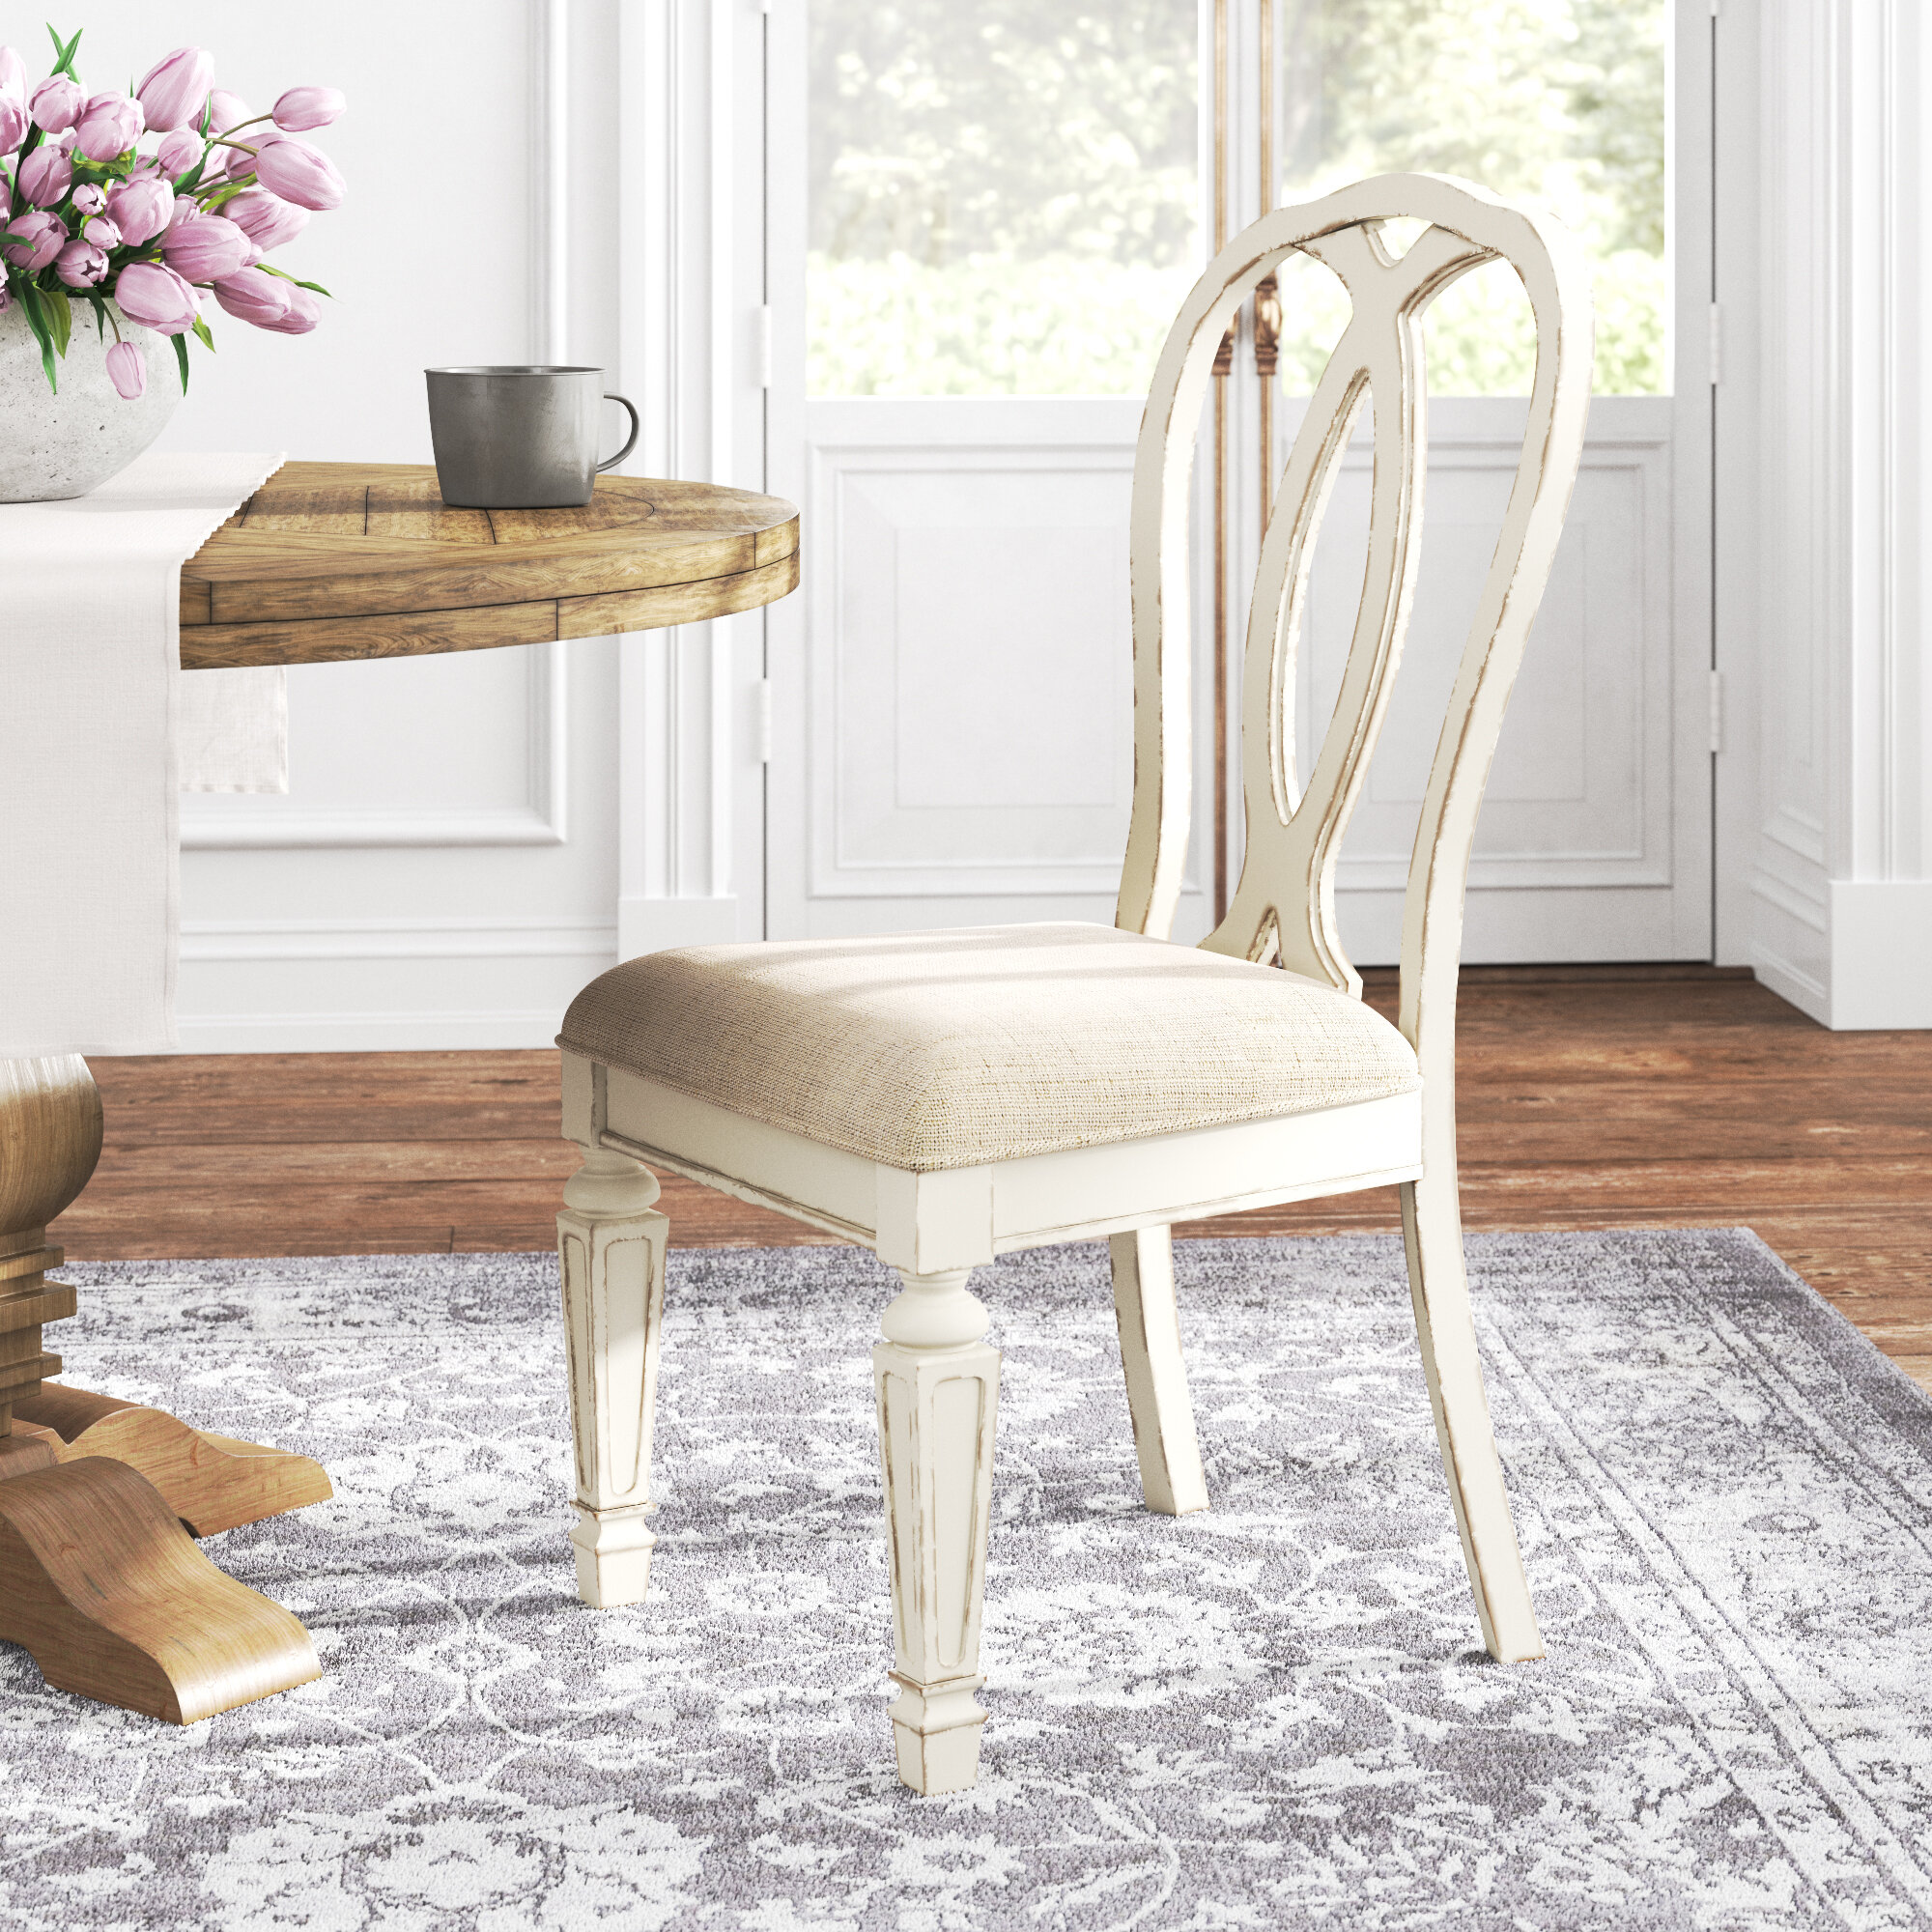 Queen Anne Kitchen Dining Chairs You Ll Love In 2021 Wayfair